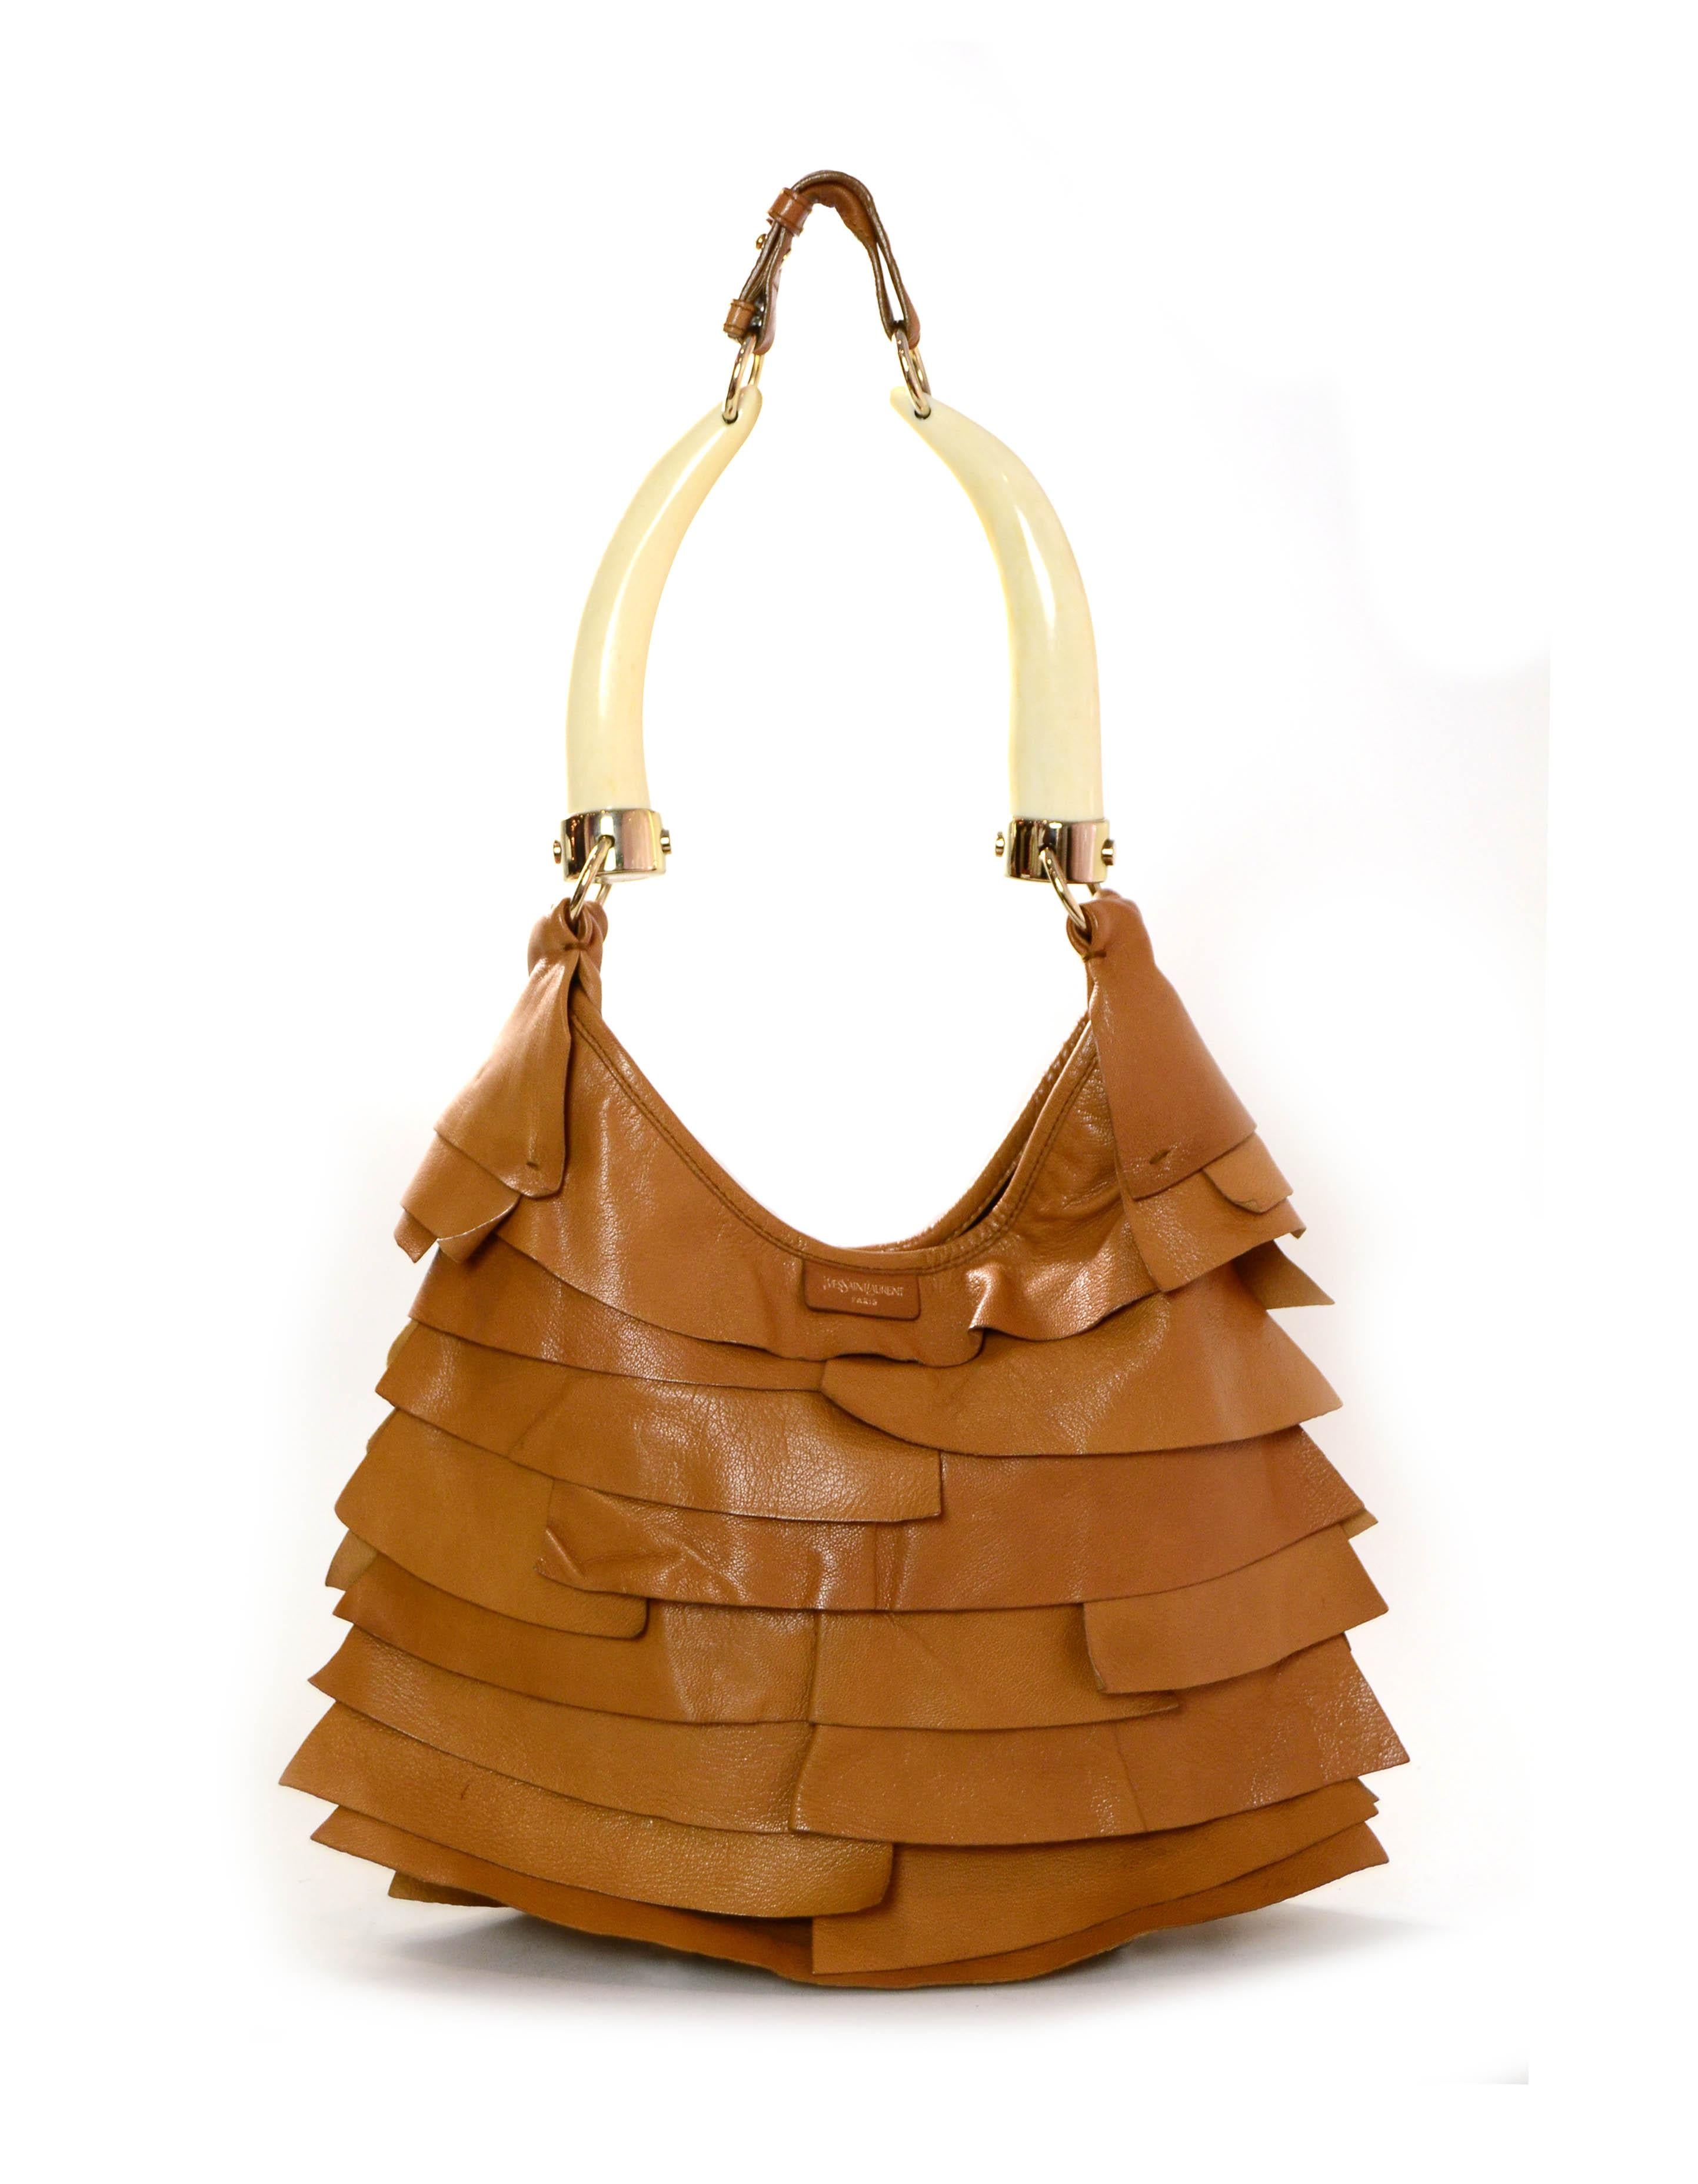 Yves Saint Laurent St. Tropez Mombasa Ruffled Bag w/Horn Handles

Made In: Paris
Color: Tan
Hardware: Goldtone
Materials: Leather
Lining: Suede
Closure/Opening: Snap
Interior Pockets: Side zipper
Exterior Condition: Good - small mark at front,